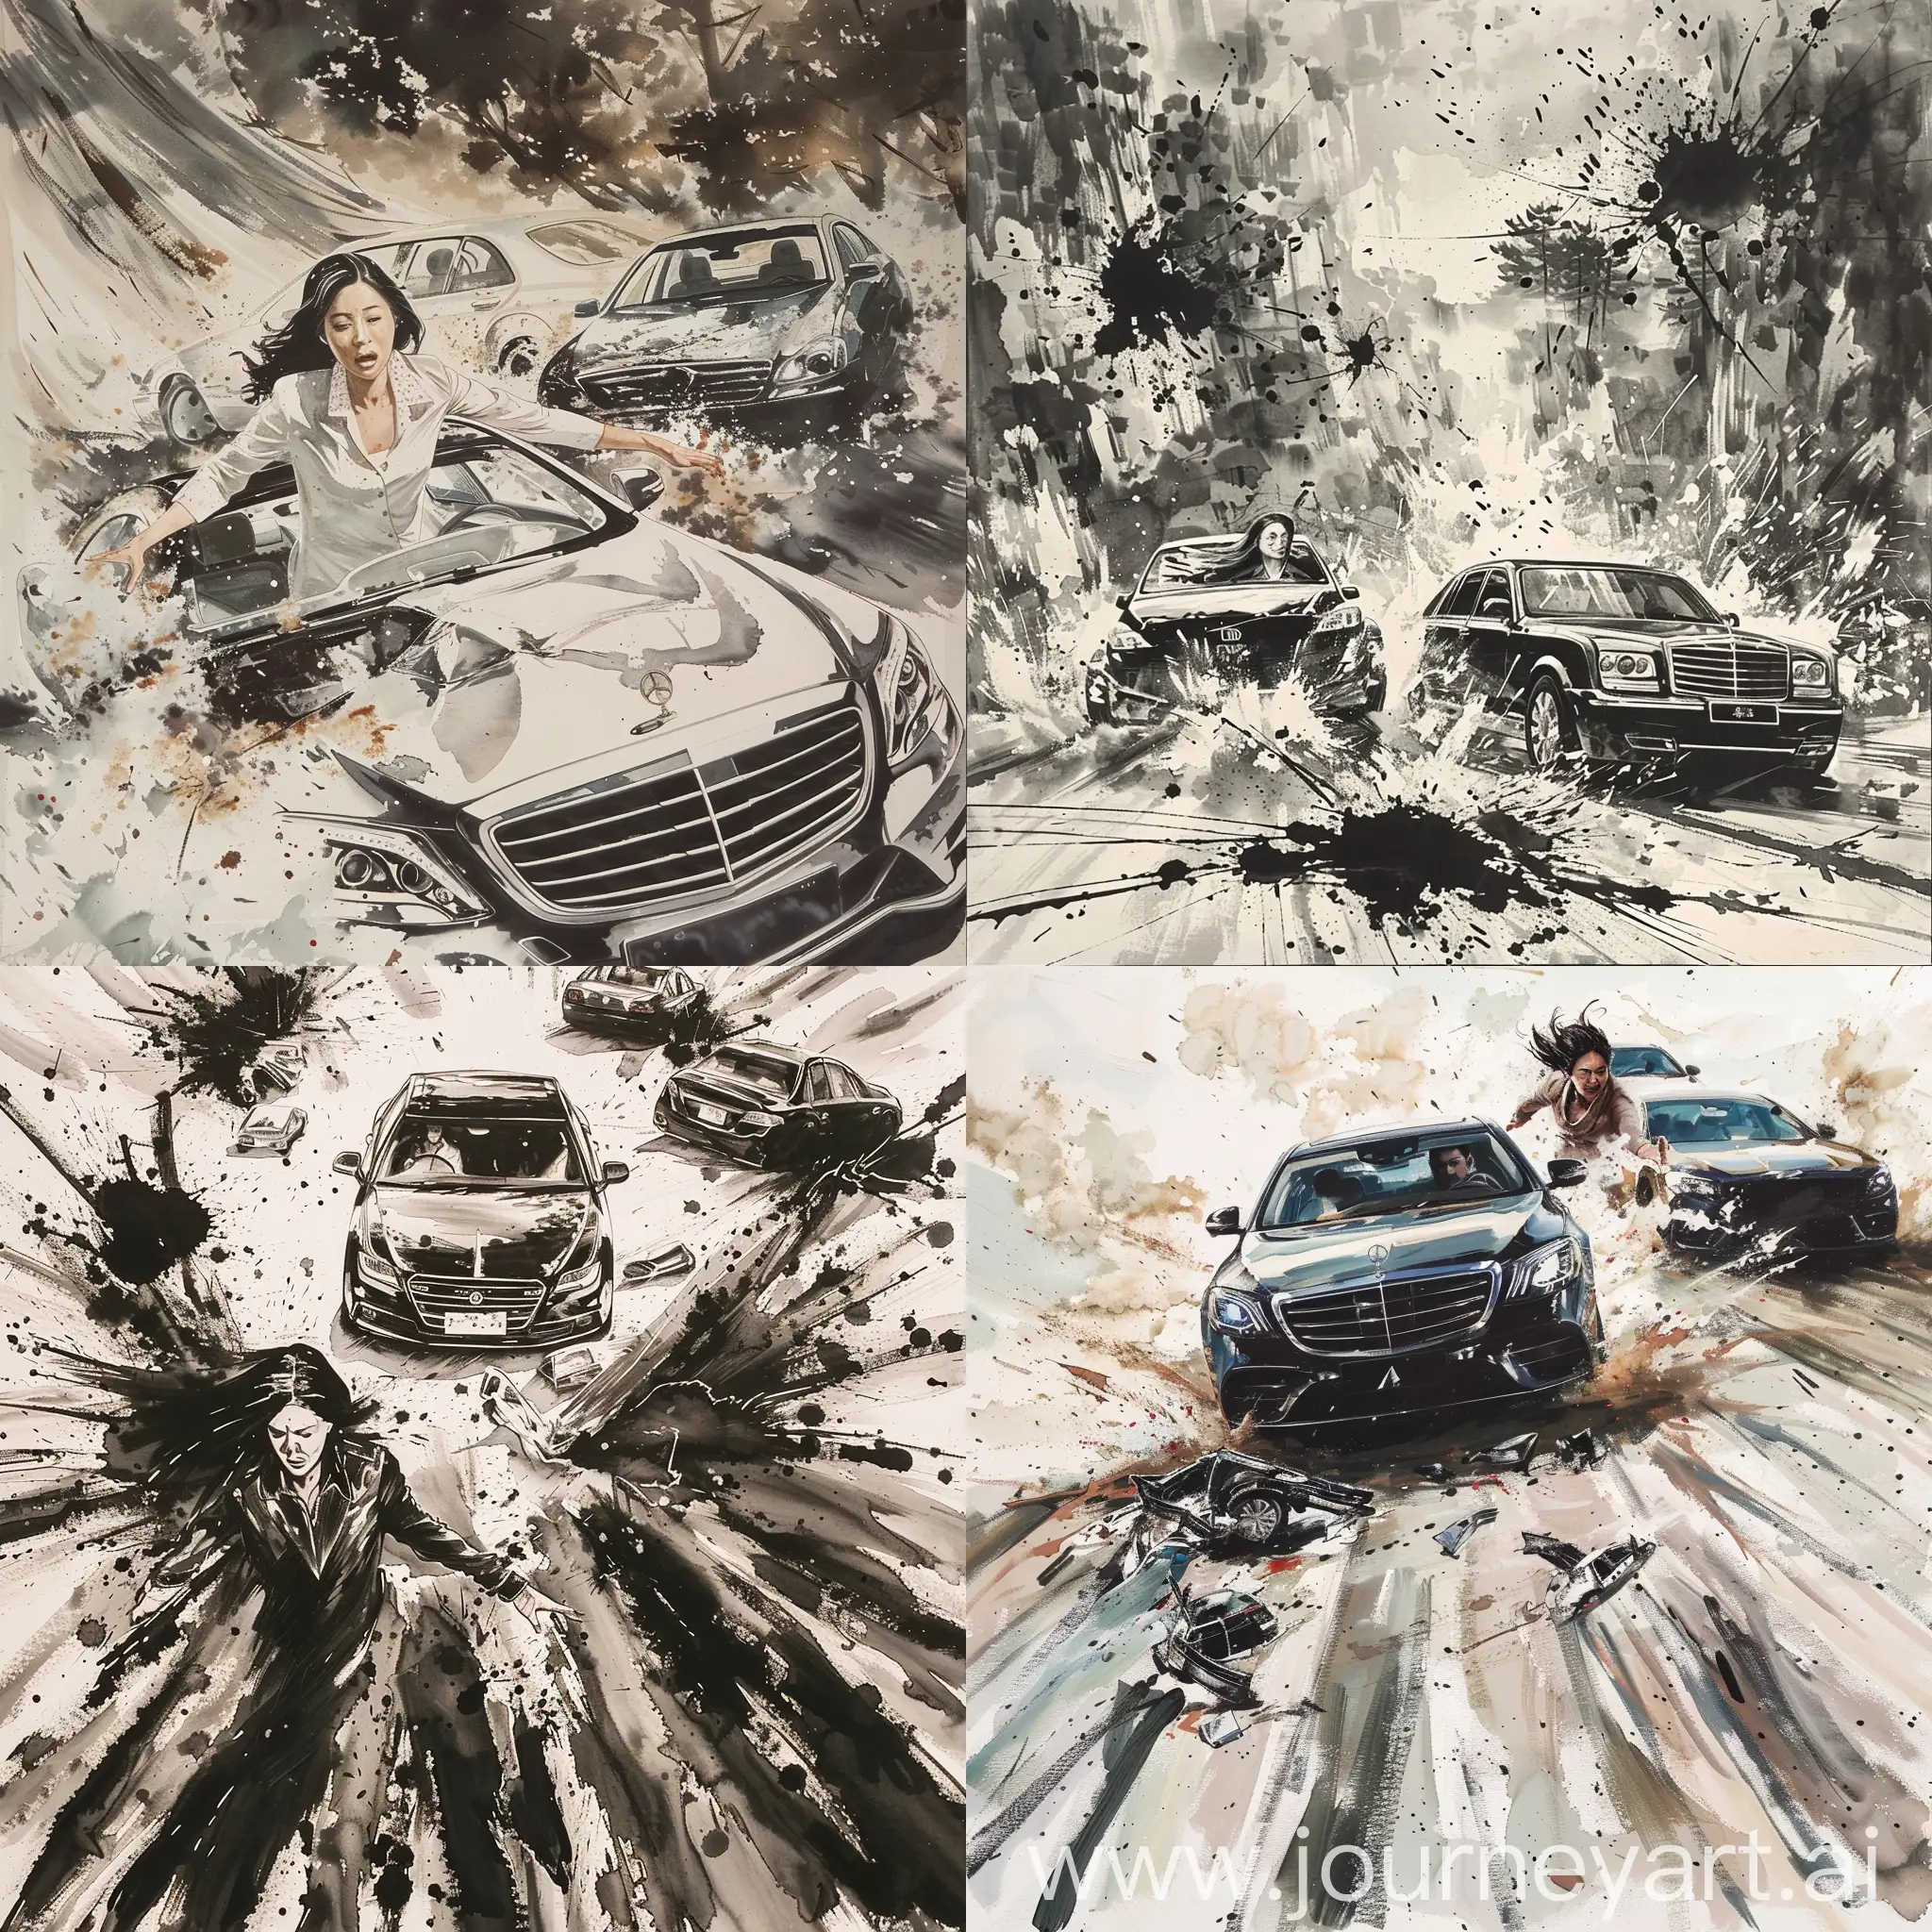 Fierce-Mother-Rushing-to-Aid-Two-Broken-Cars-in-Ink-Painting-Style